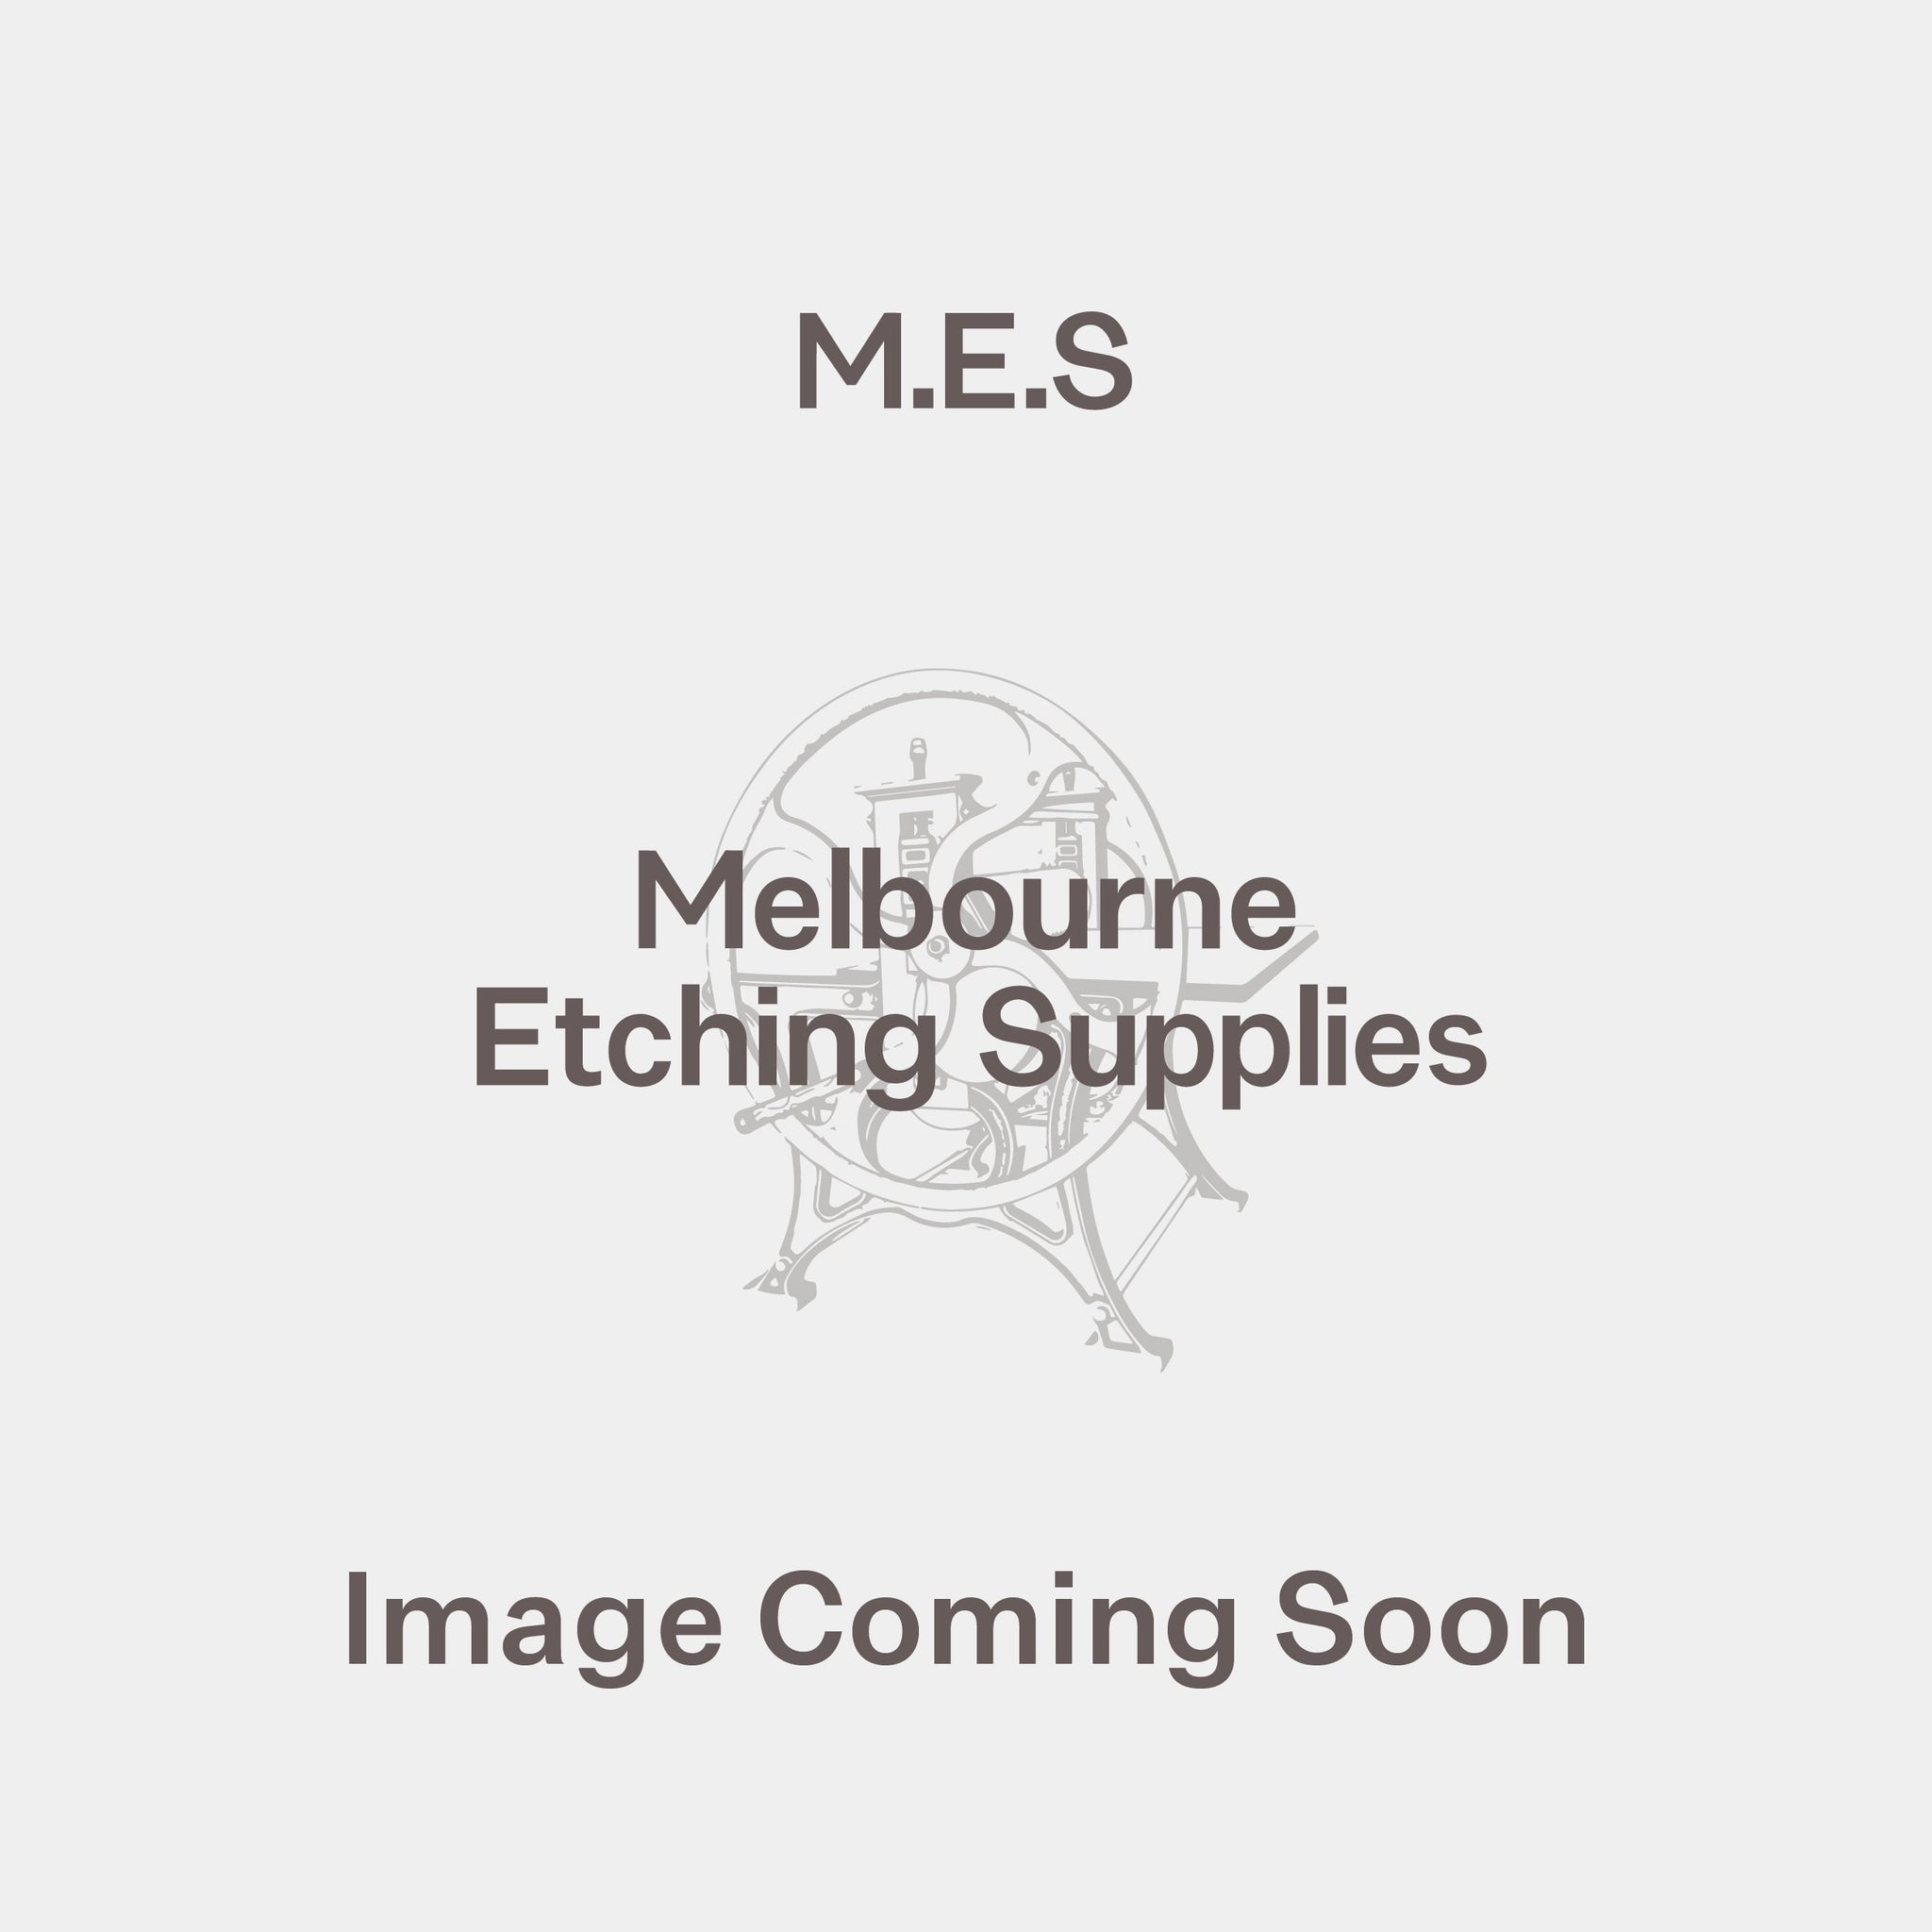 Fabriano Medioevalis Envelope - Melbourne Etching Supplies